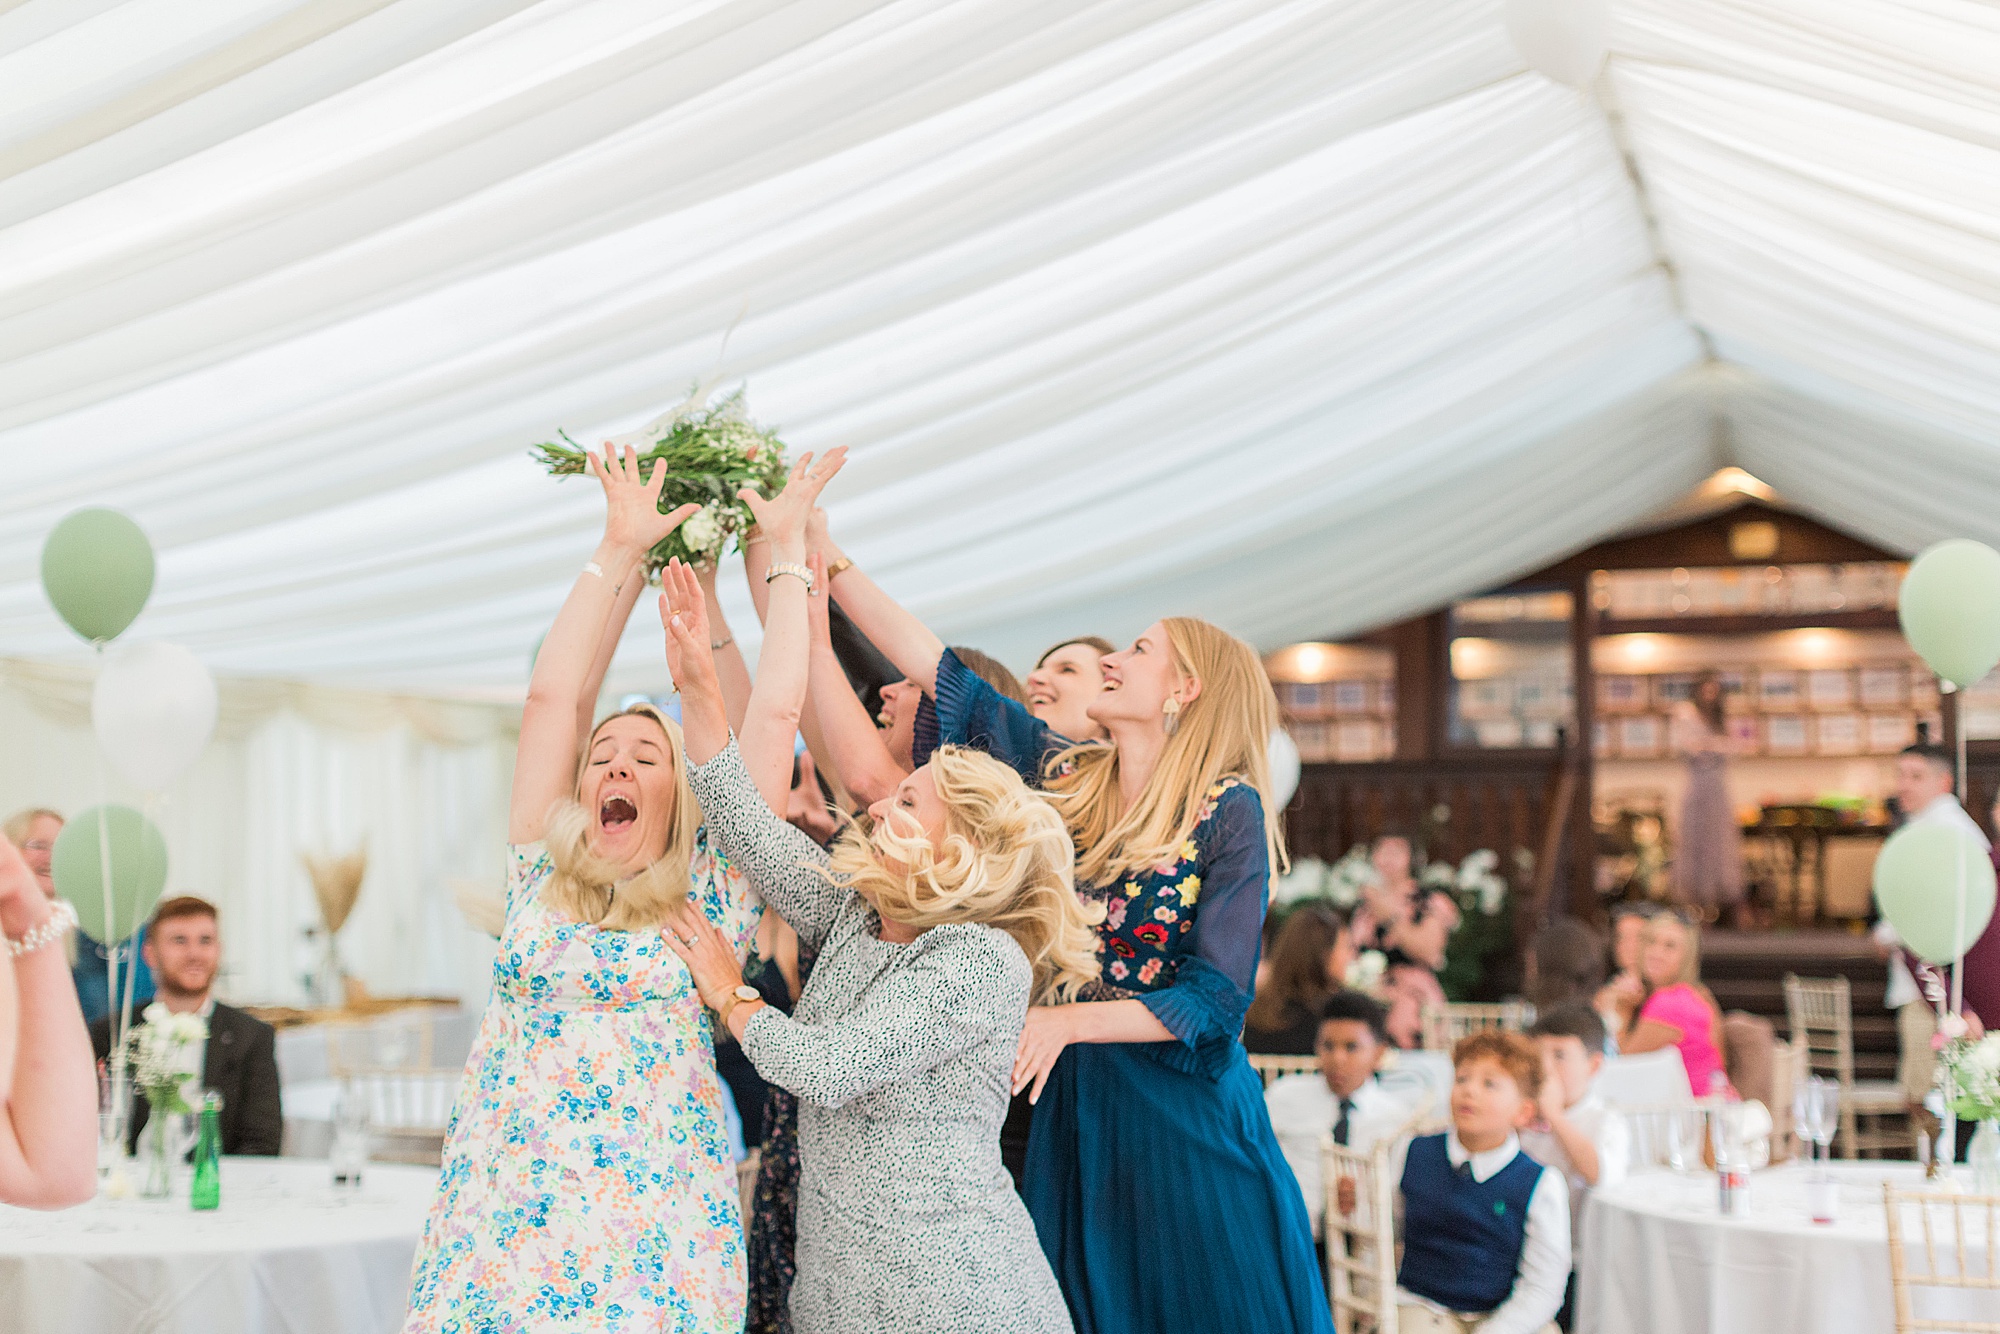 photo shows a group of female guests at a wedding stood on a dance floor about the catch the bouquet that the bride has just thrown